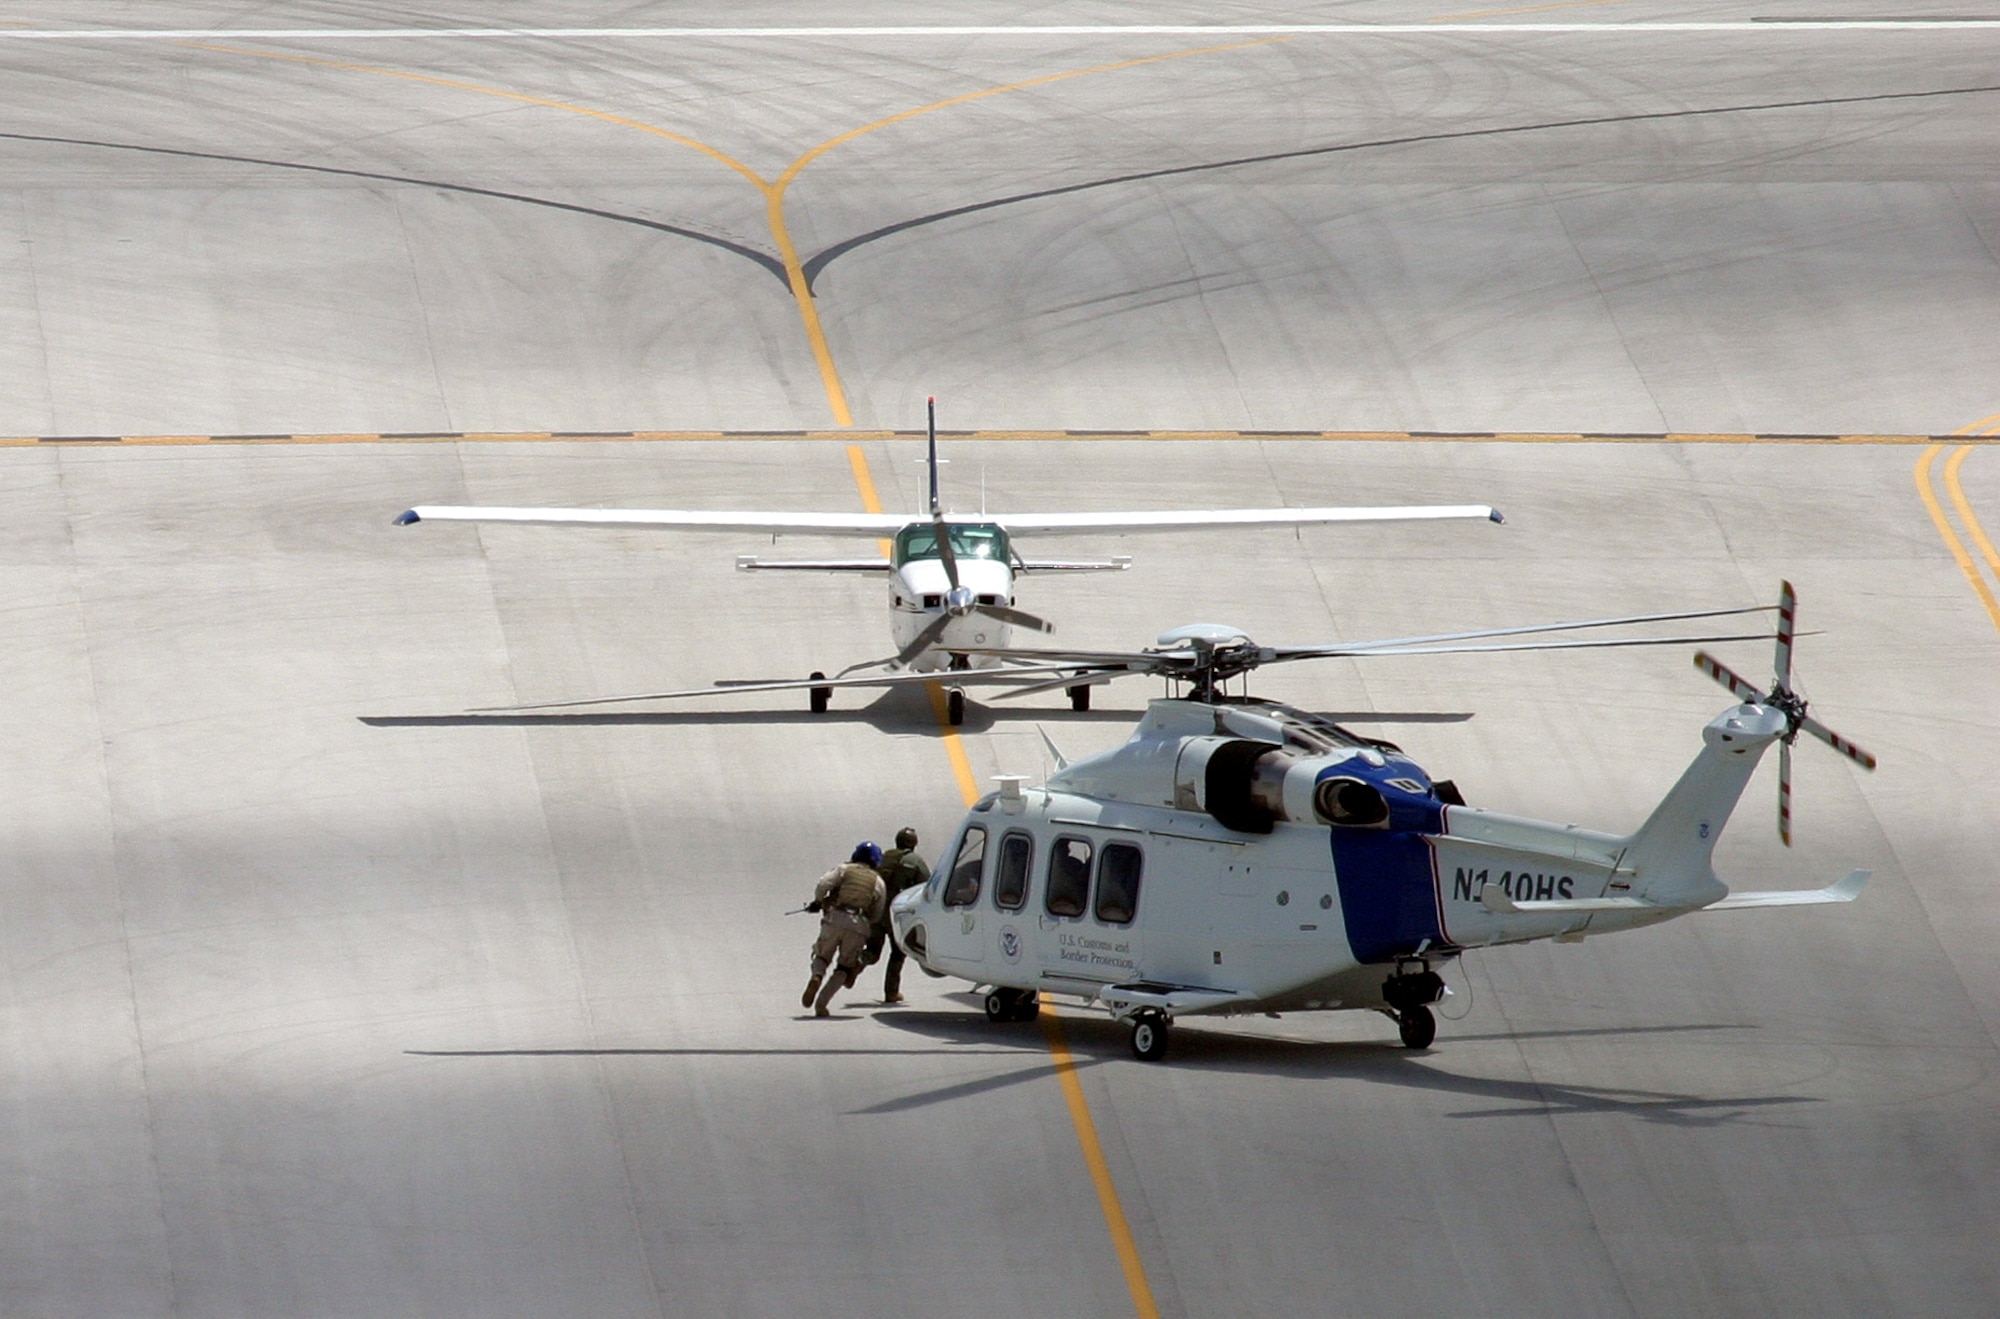 Agents from the U.S. Customs and Border Protection (CBP) Miami Air and Marine Branch, located at Homestead Air Reserve Base, perform an operational test and evaluation of an AgustaWestland AW139 helicopter during a training mission on April 2. The helicopter was tested for use in the air interdiction portion of the CBP mission to ensure federal law enforcement officers have the right equipment to safely and reliably conduct border security missions. (U.S. CBP courtesy photo)